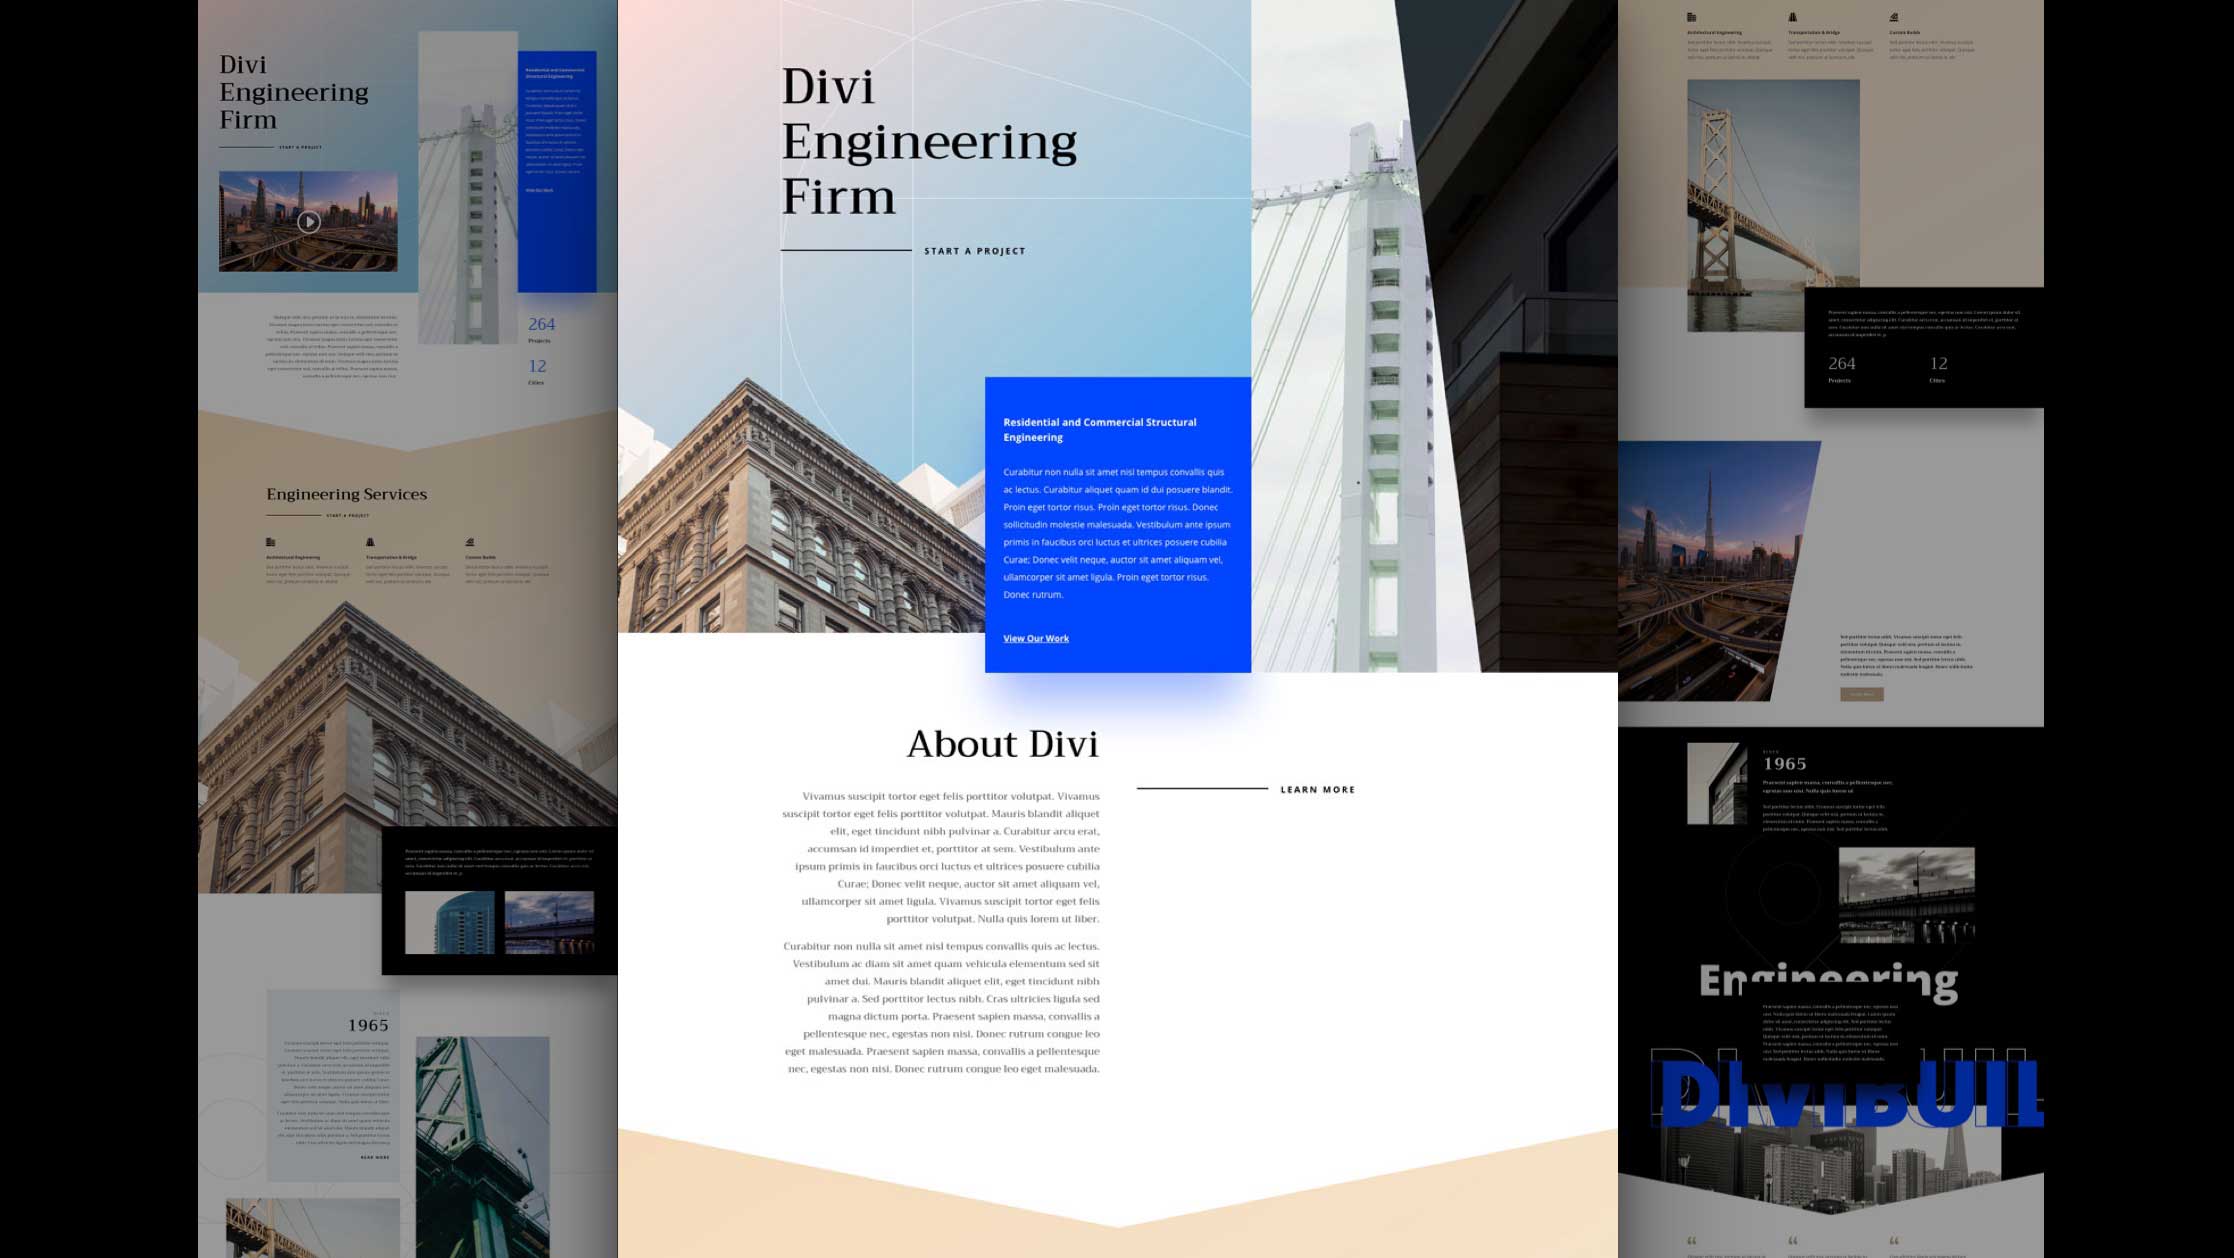 Get a FREE Engineering Firm Layout Pack for Divi